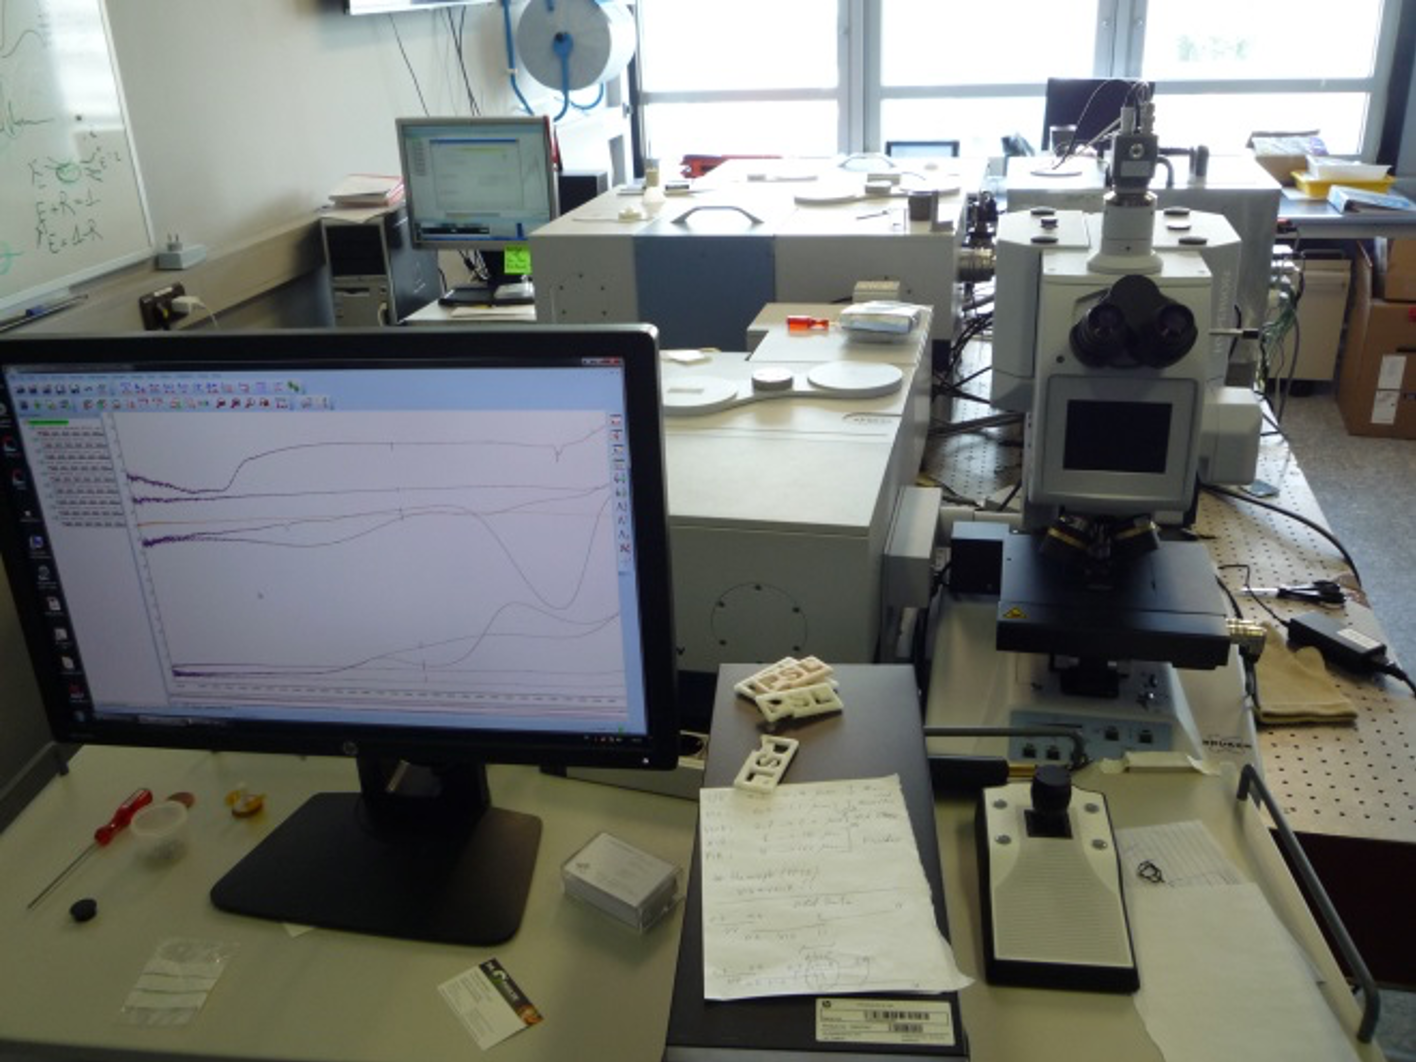 TA 2.5: The Laboratory set-up at PSL with view of the 3 spectrometers and the microscope visible in foreground.